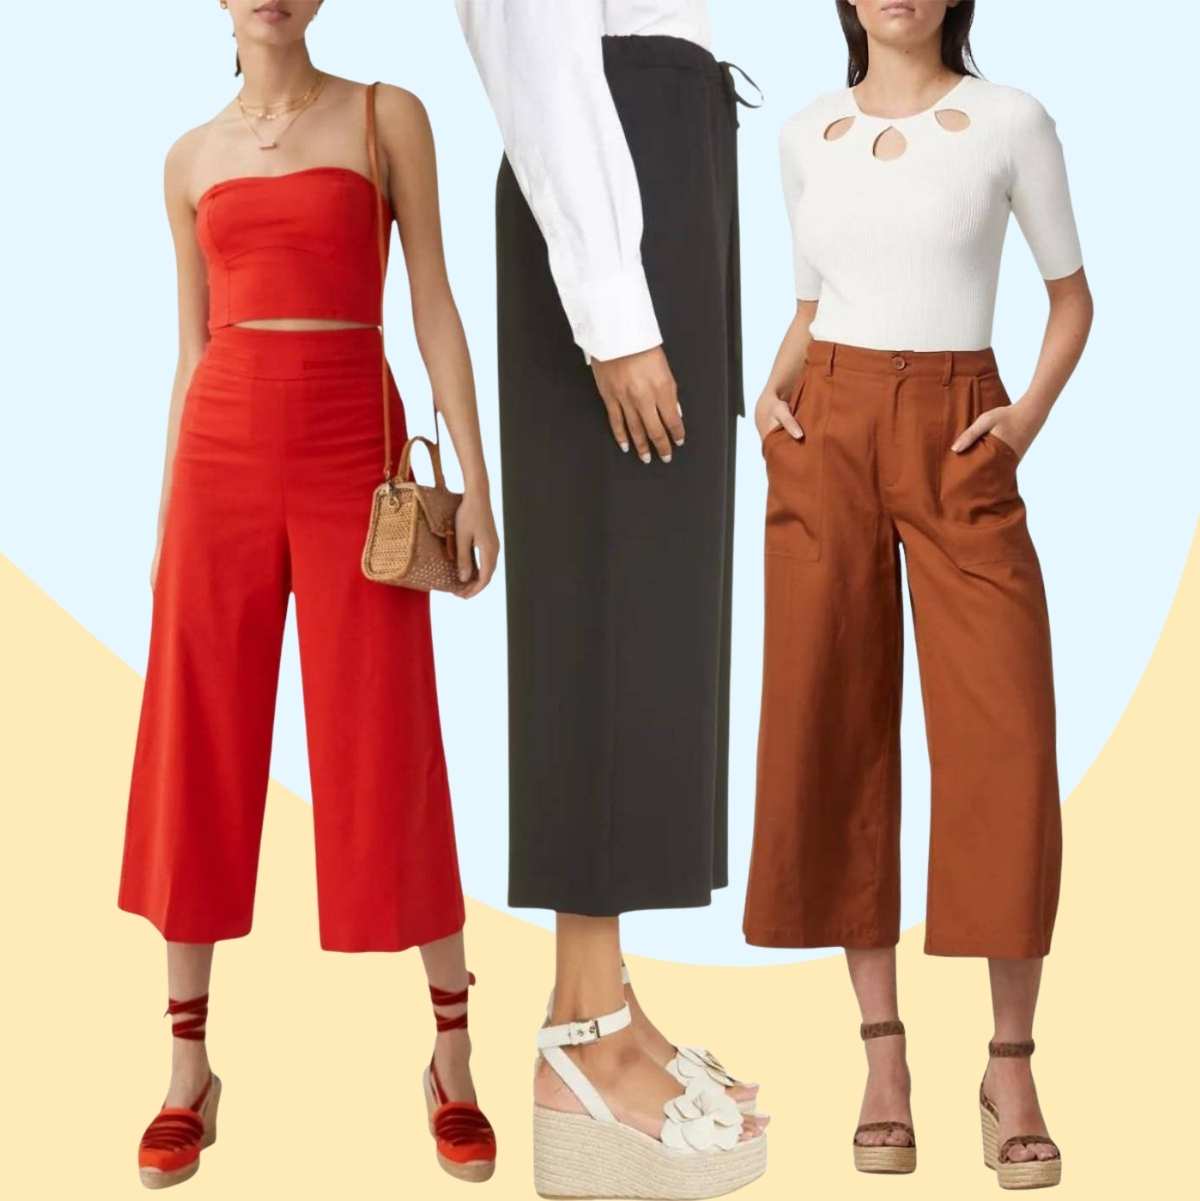 Collage of 3 women wearing pants with espadrilles outfits.